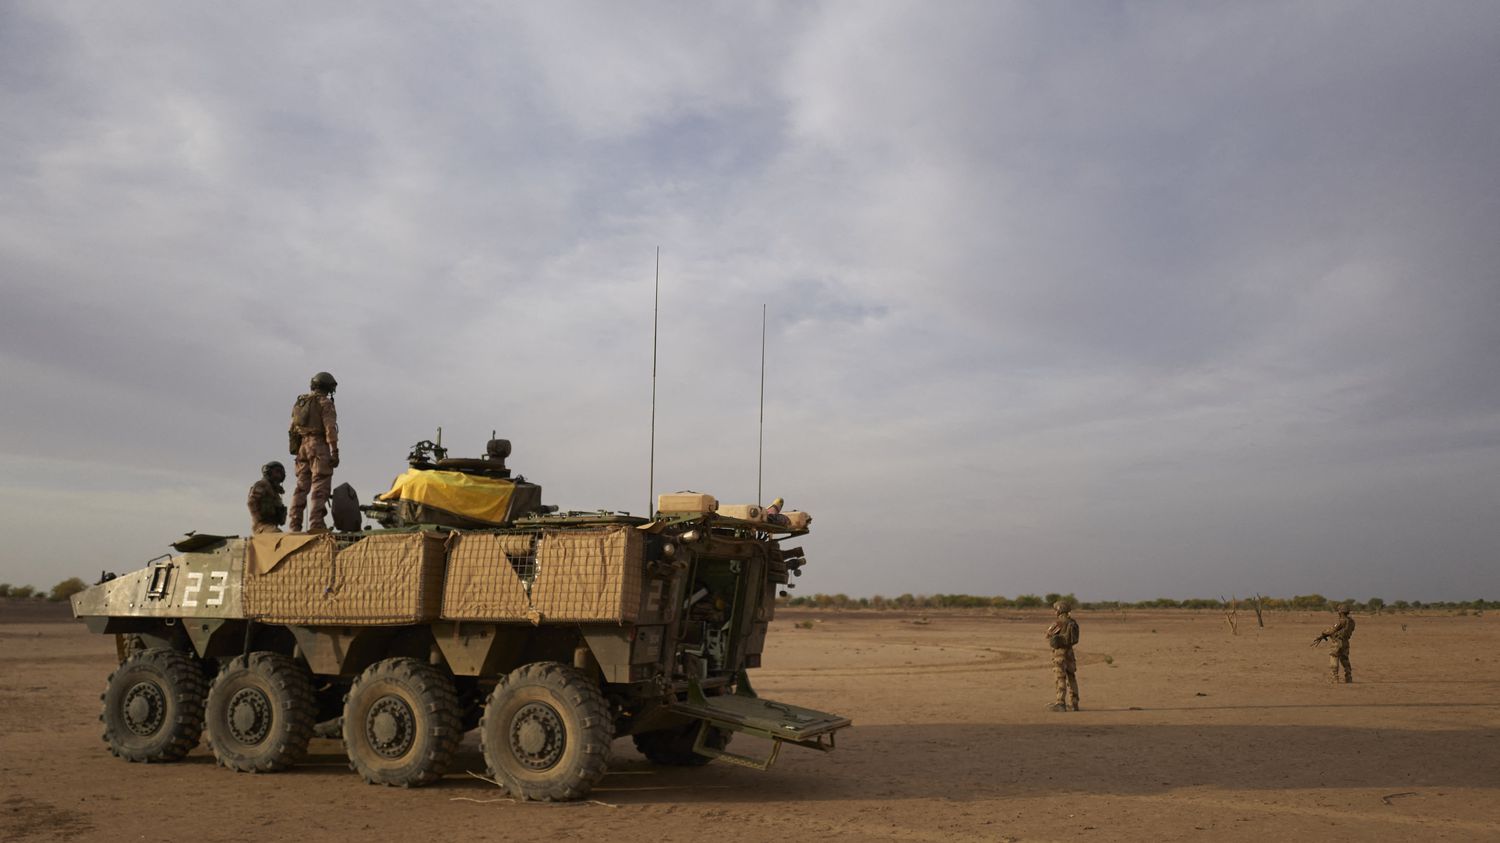 Burkina Faso announces the official end of operations by French troops on its soil
